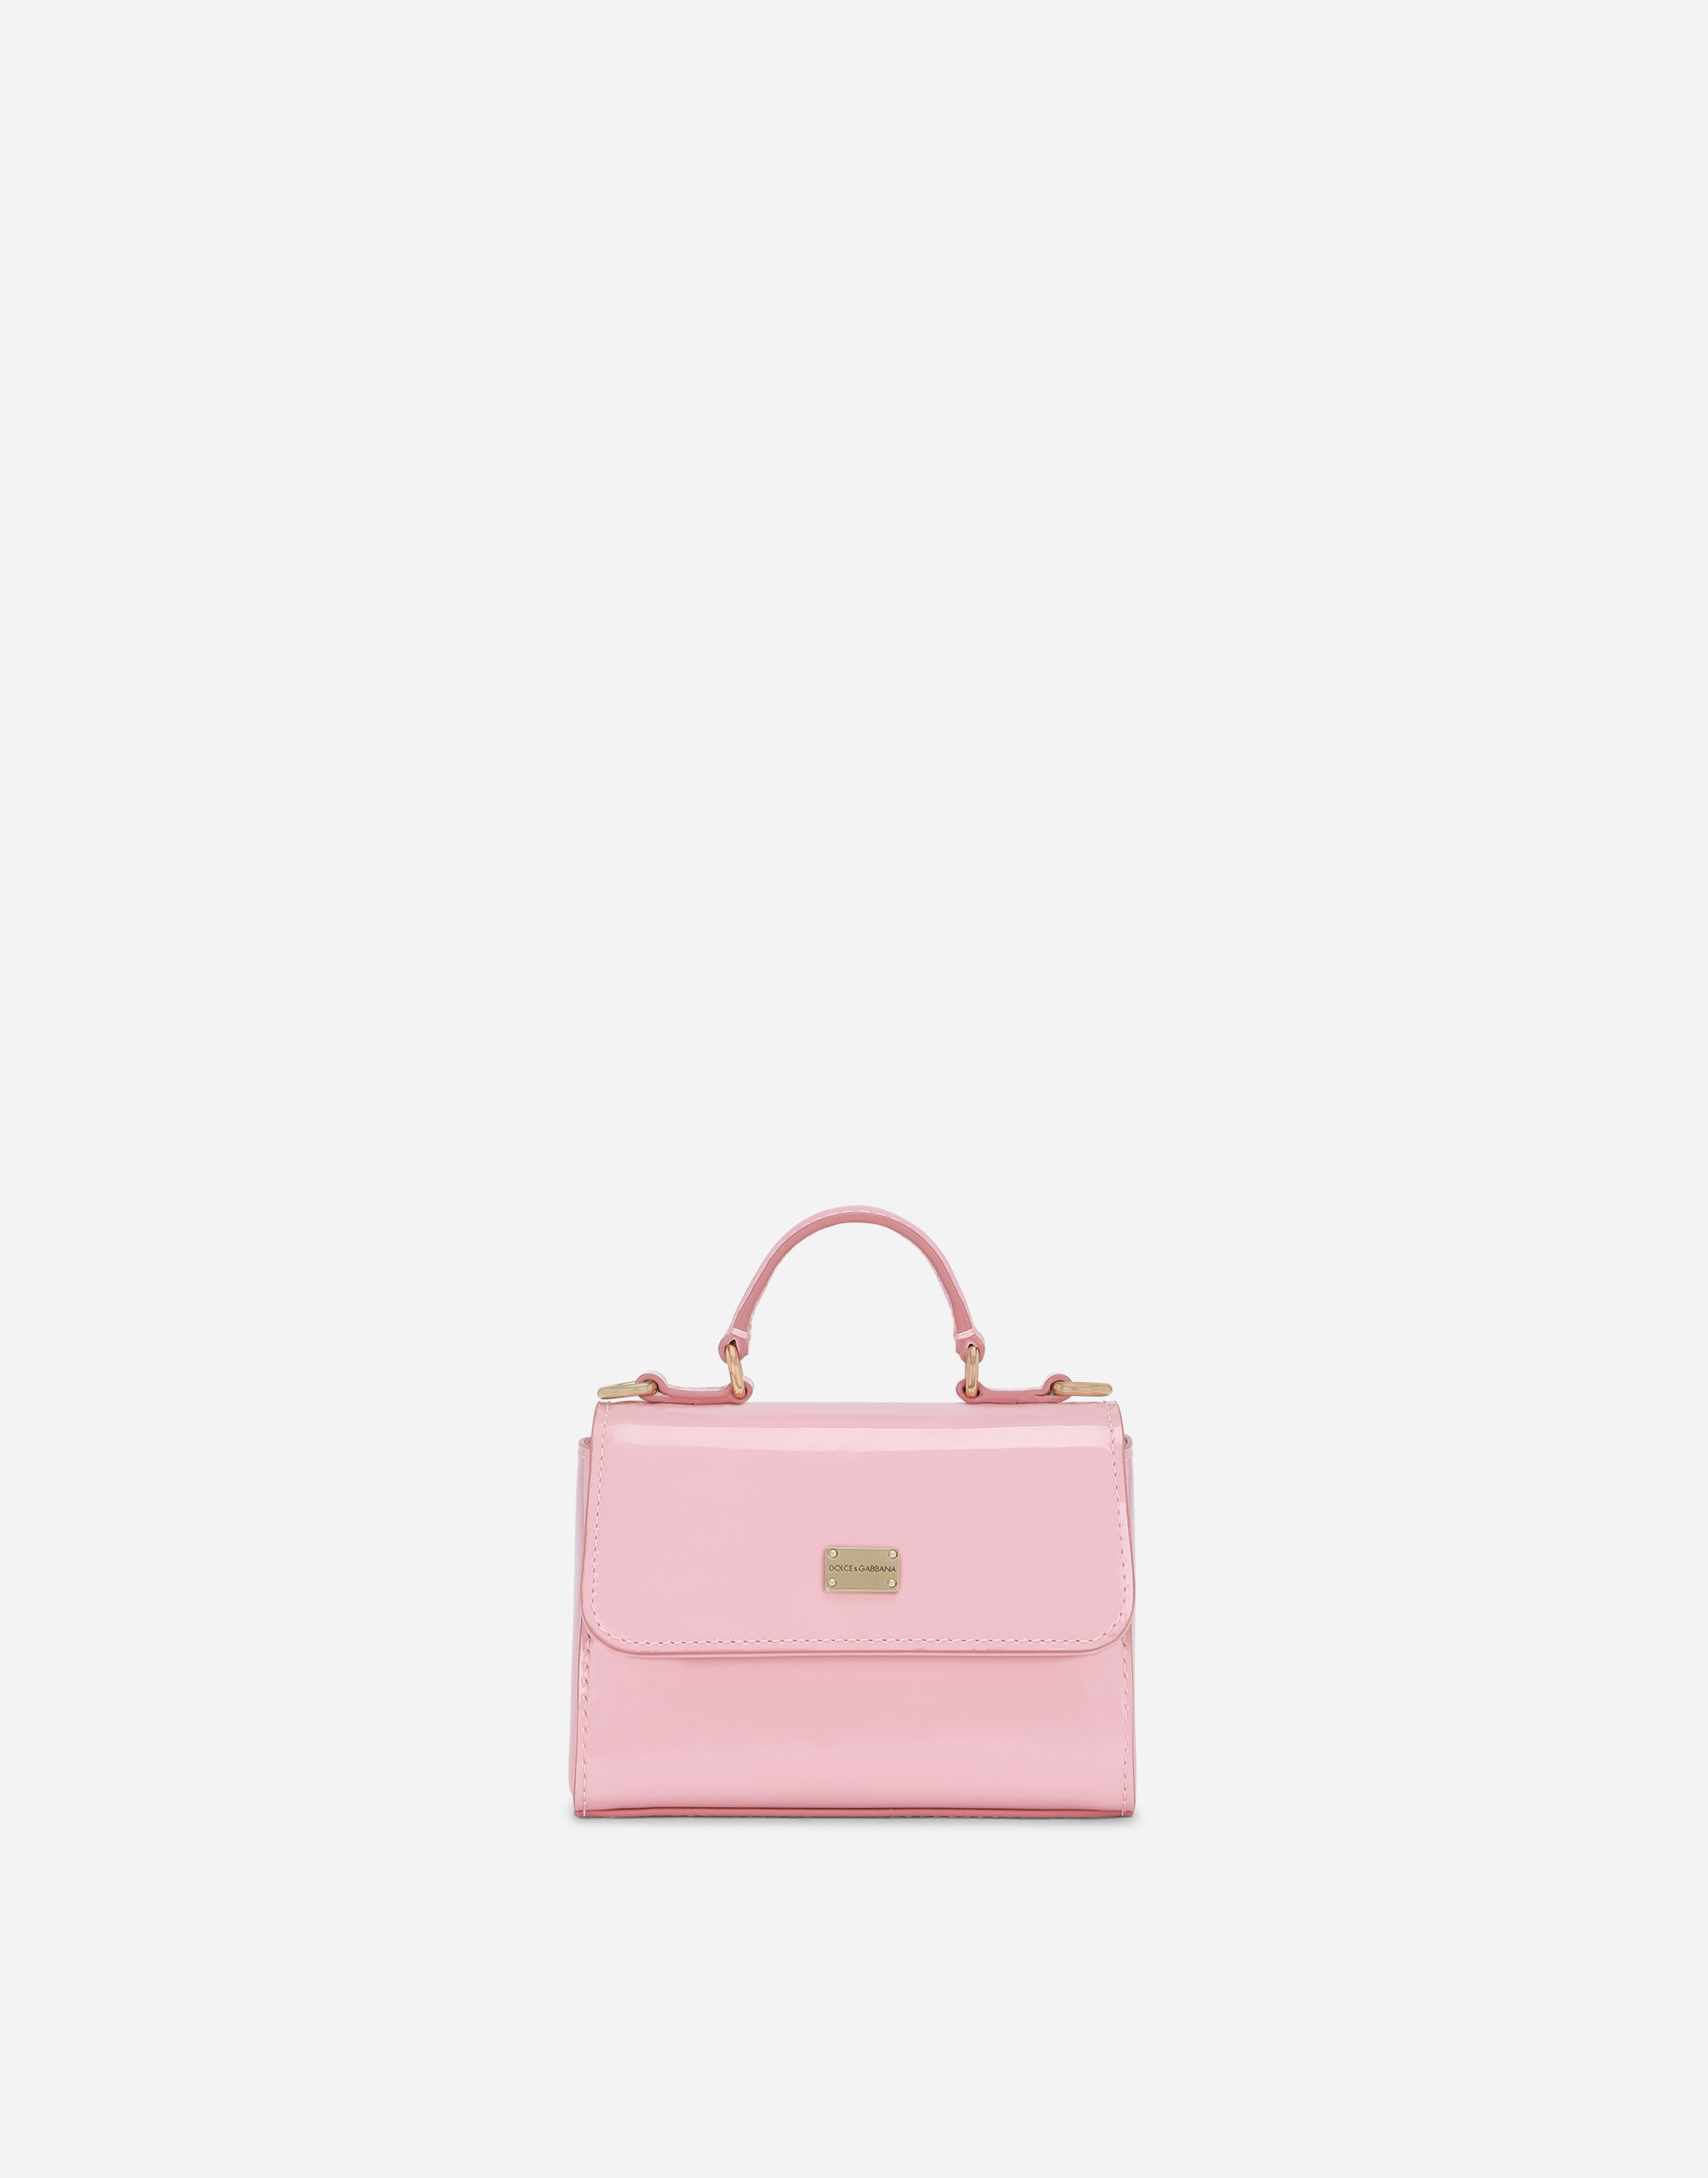 Patent leather handbag in Pink